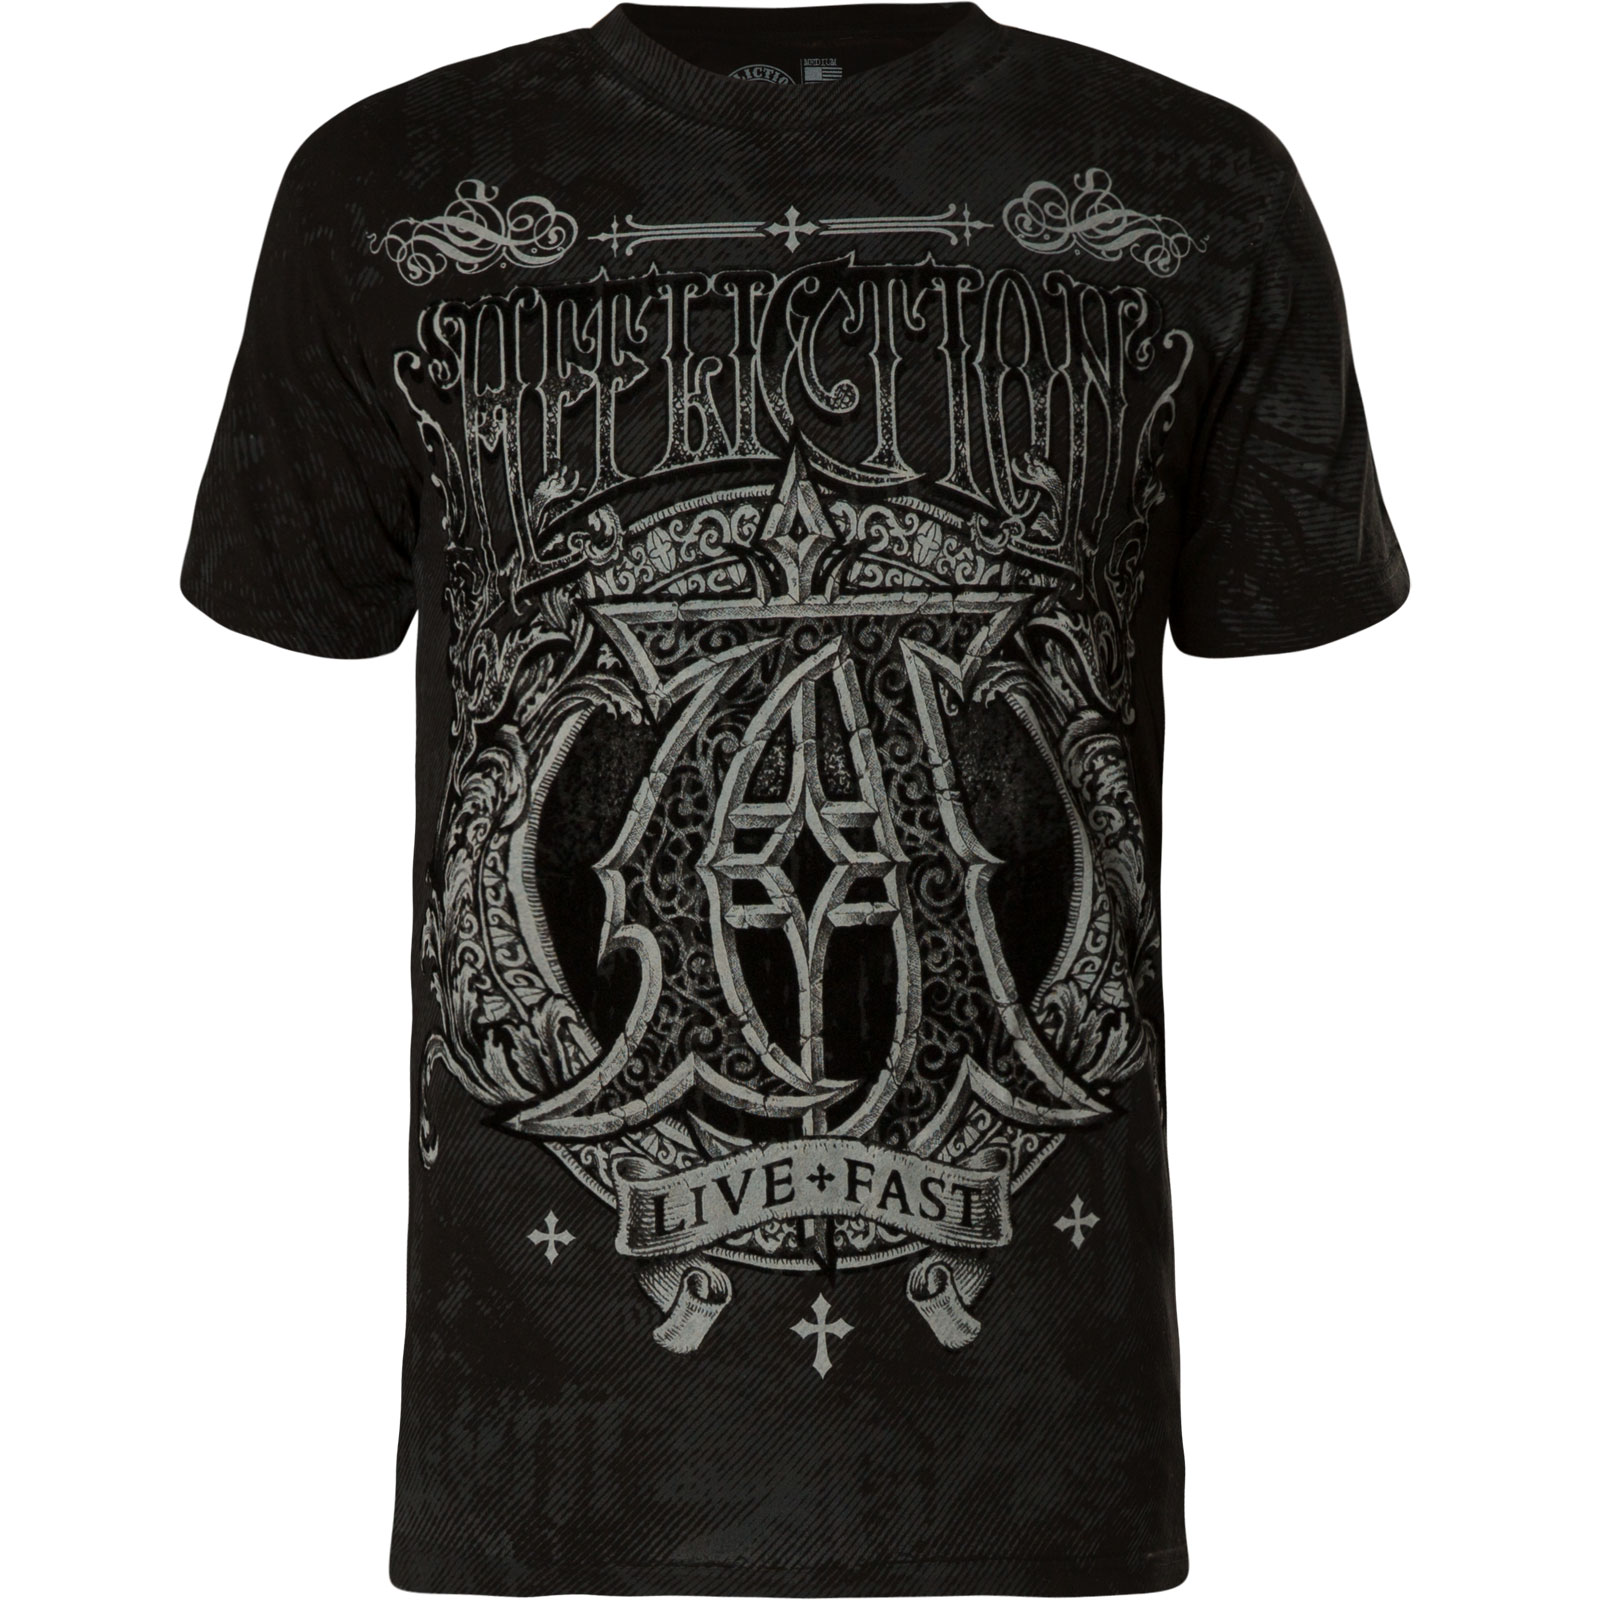 Affliction Existence T-Shirt Print featuring a crest and Affliction Logo